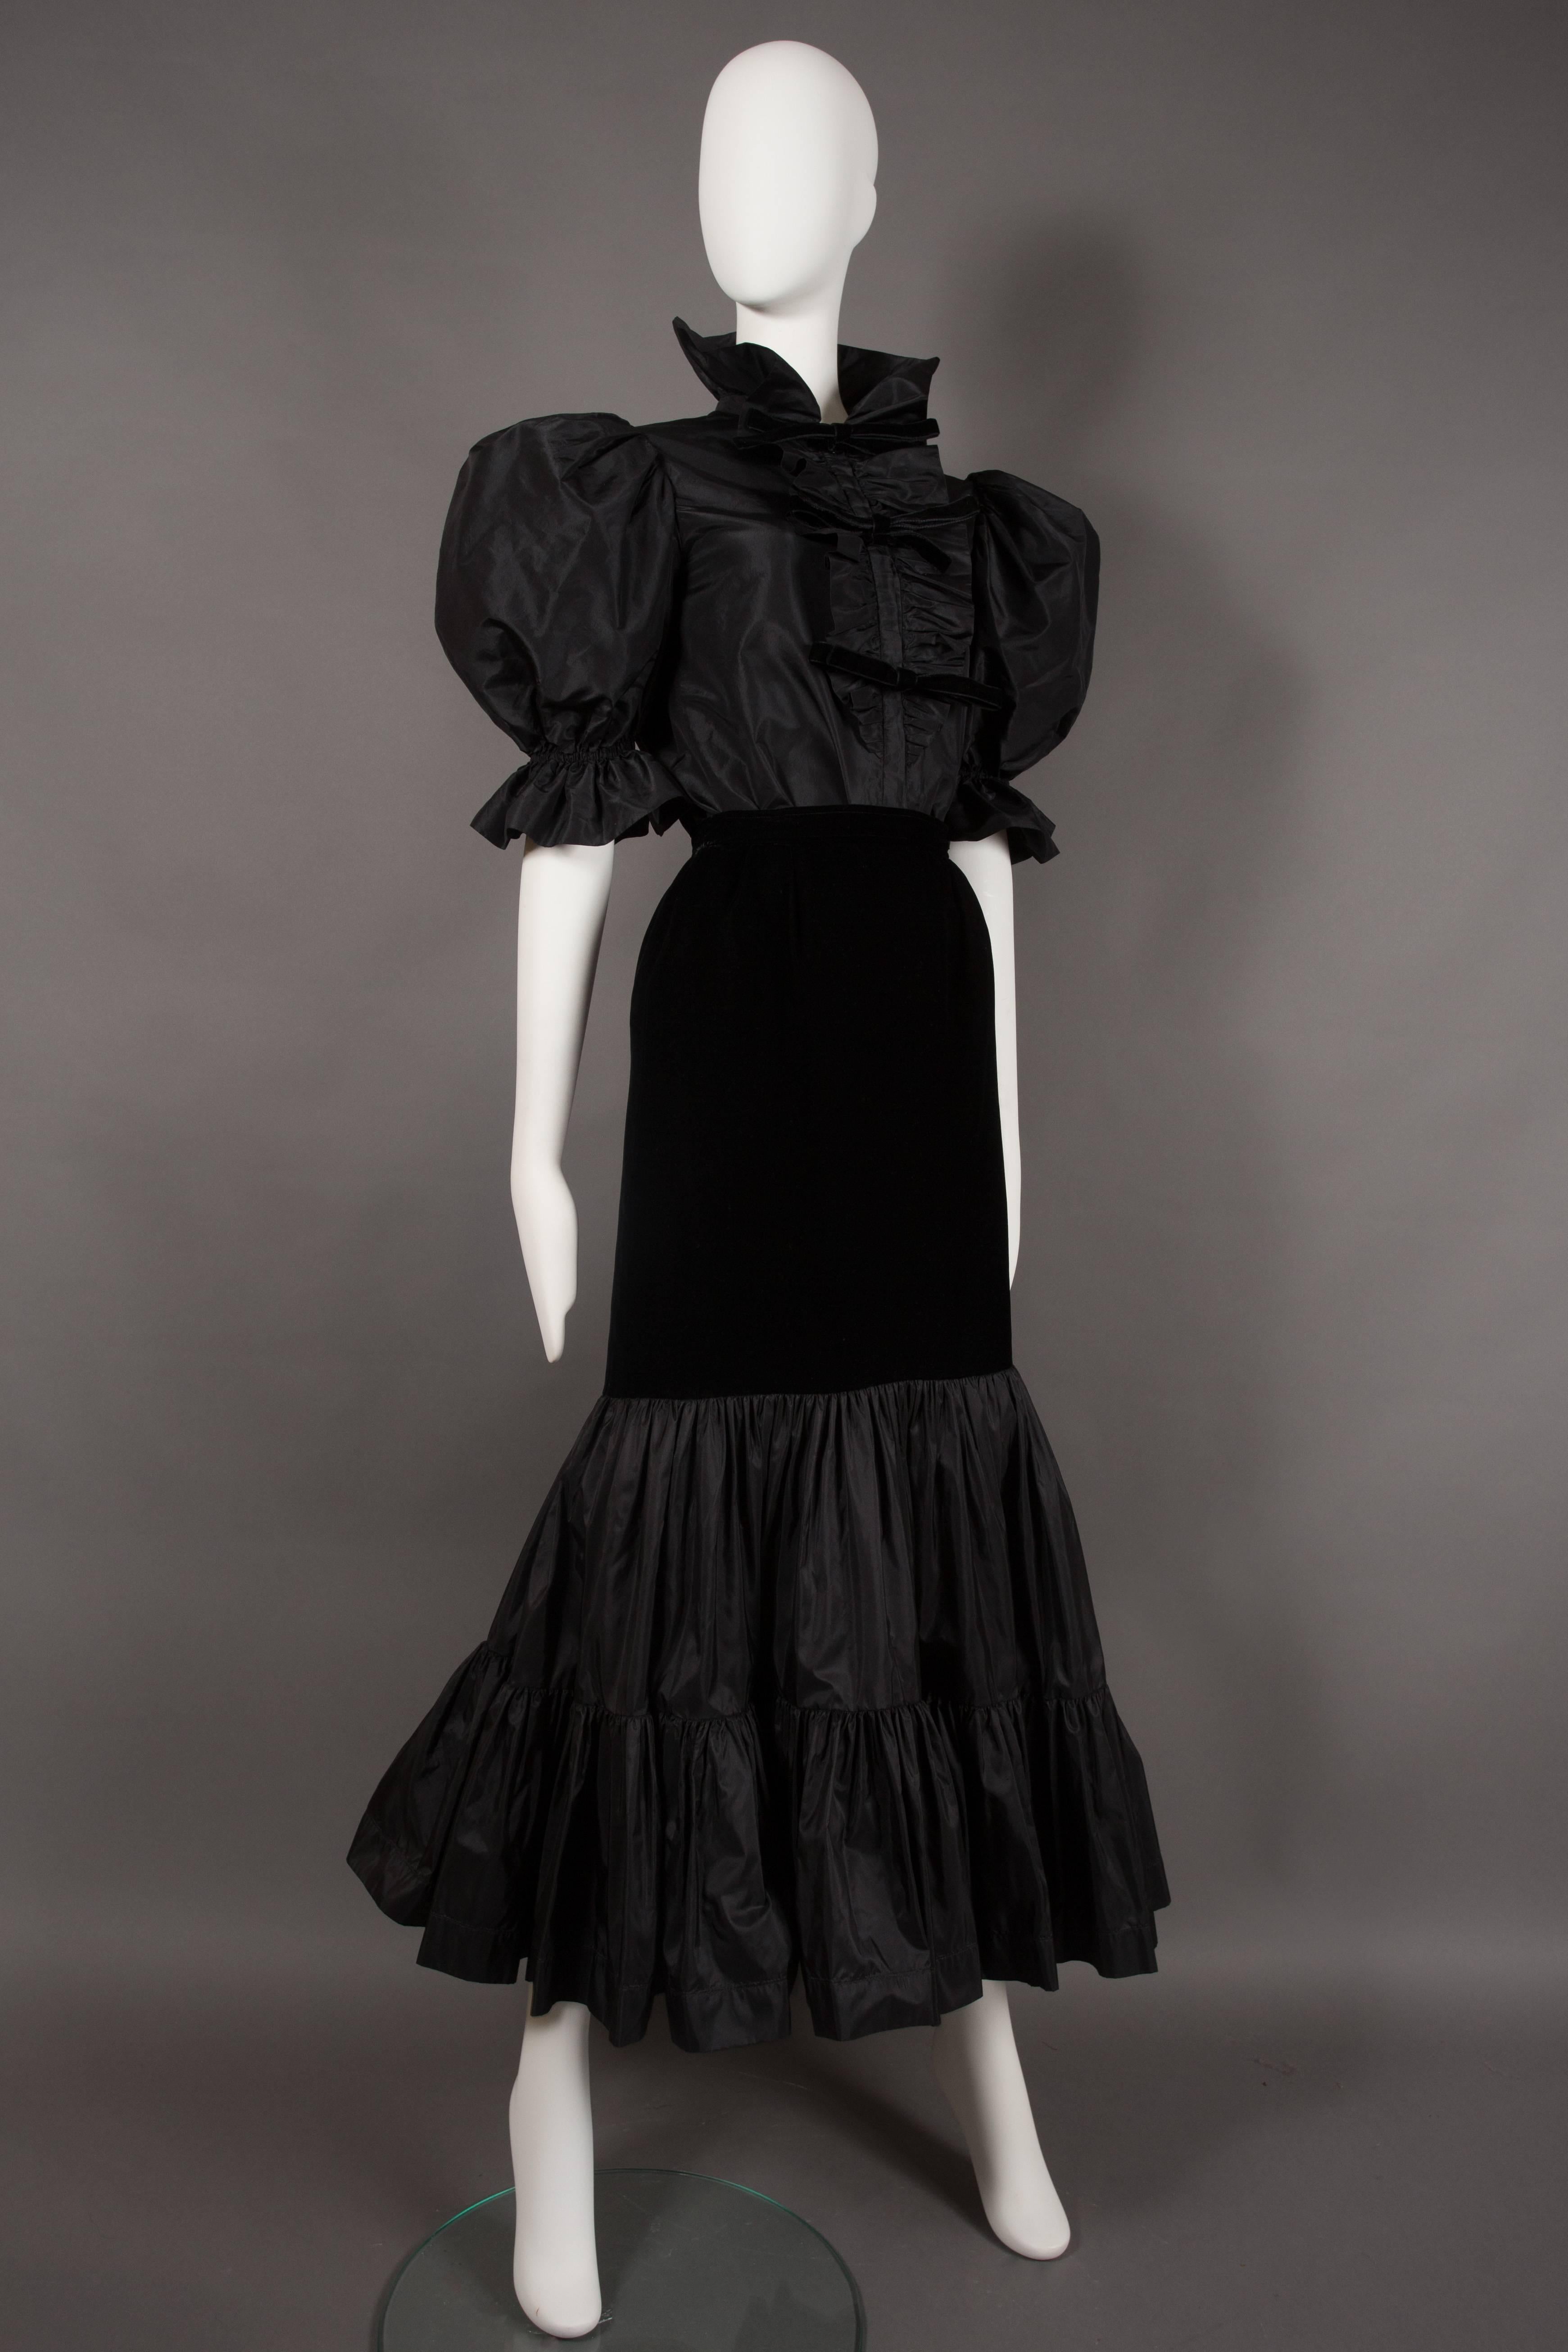 Presenting an exceptionally rare Yves Saint Laurent black silk taffeta and velvet evening ensemble, a true treasure from the esteemed designer's collection circa 1977-78. This exquisite ensemble exudes timeless elegance and is a testament to Yves